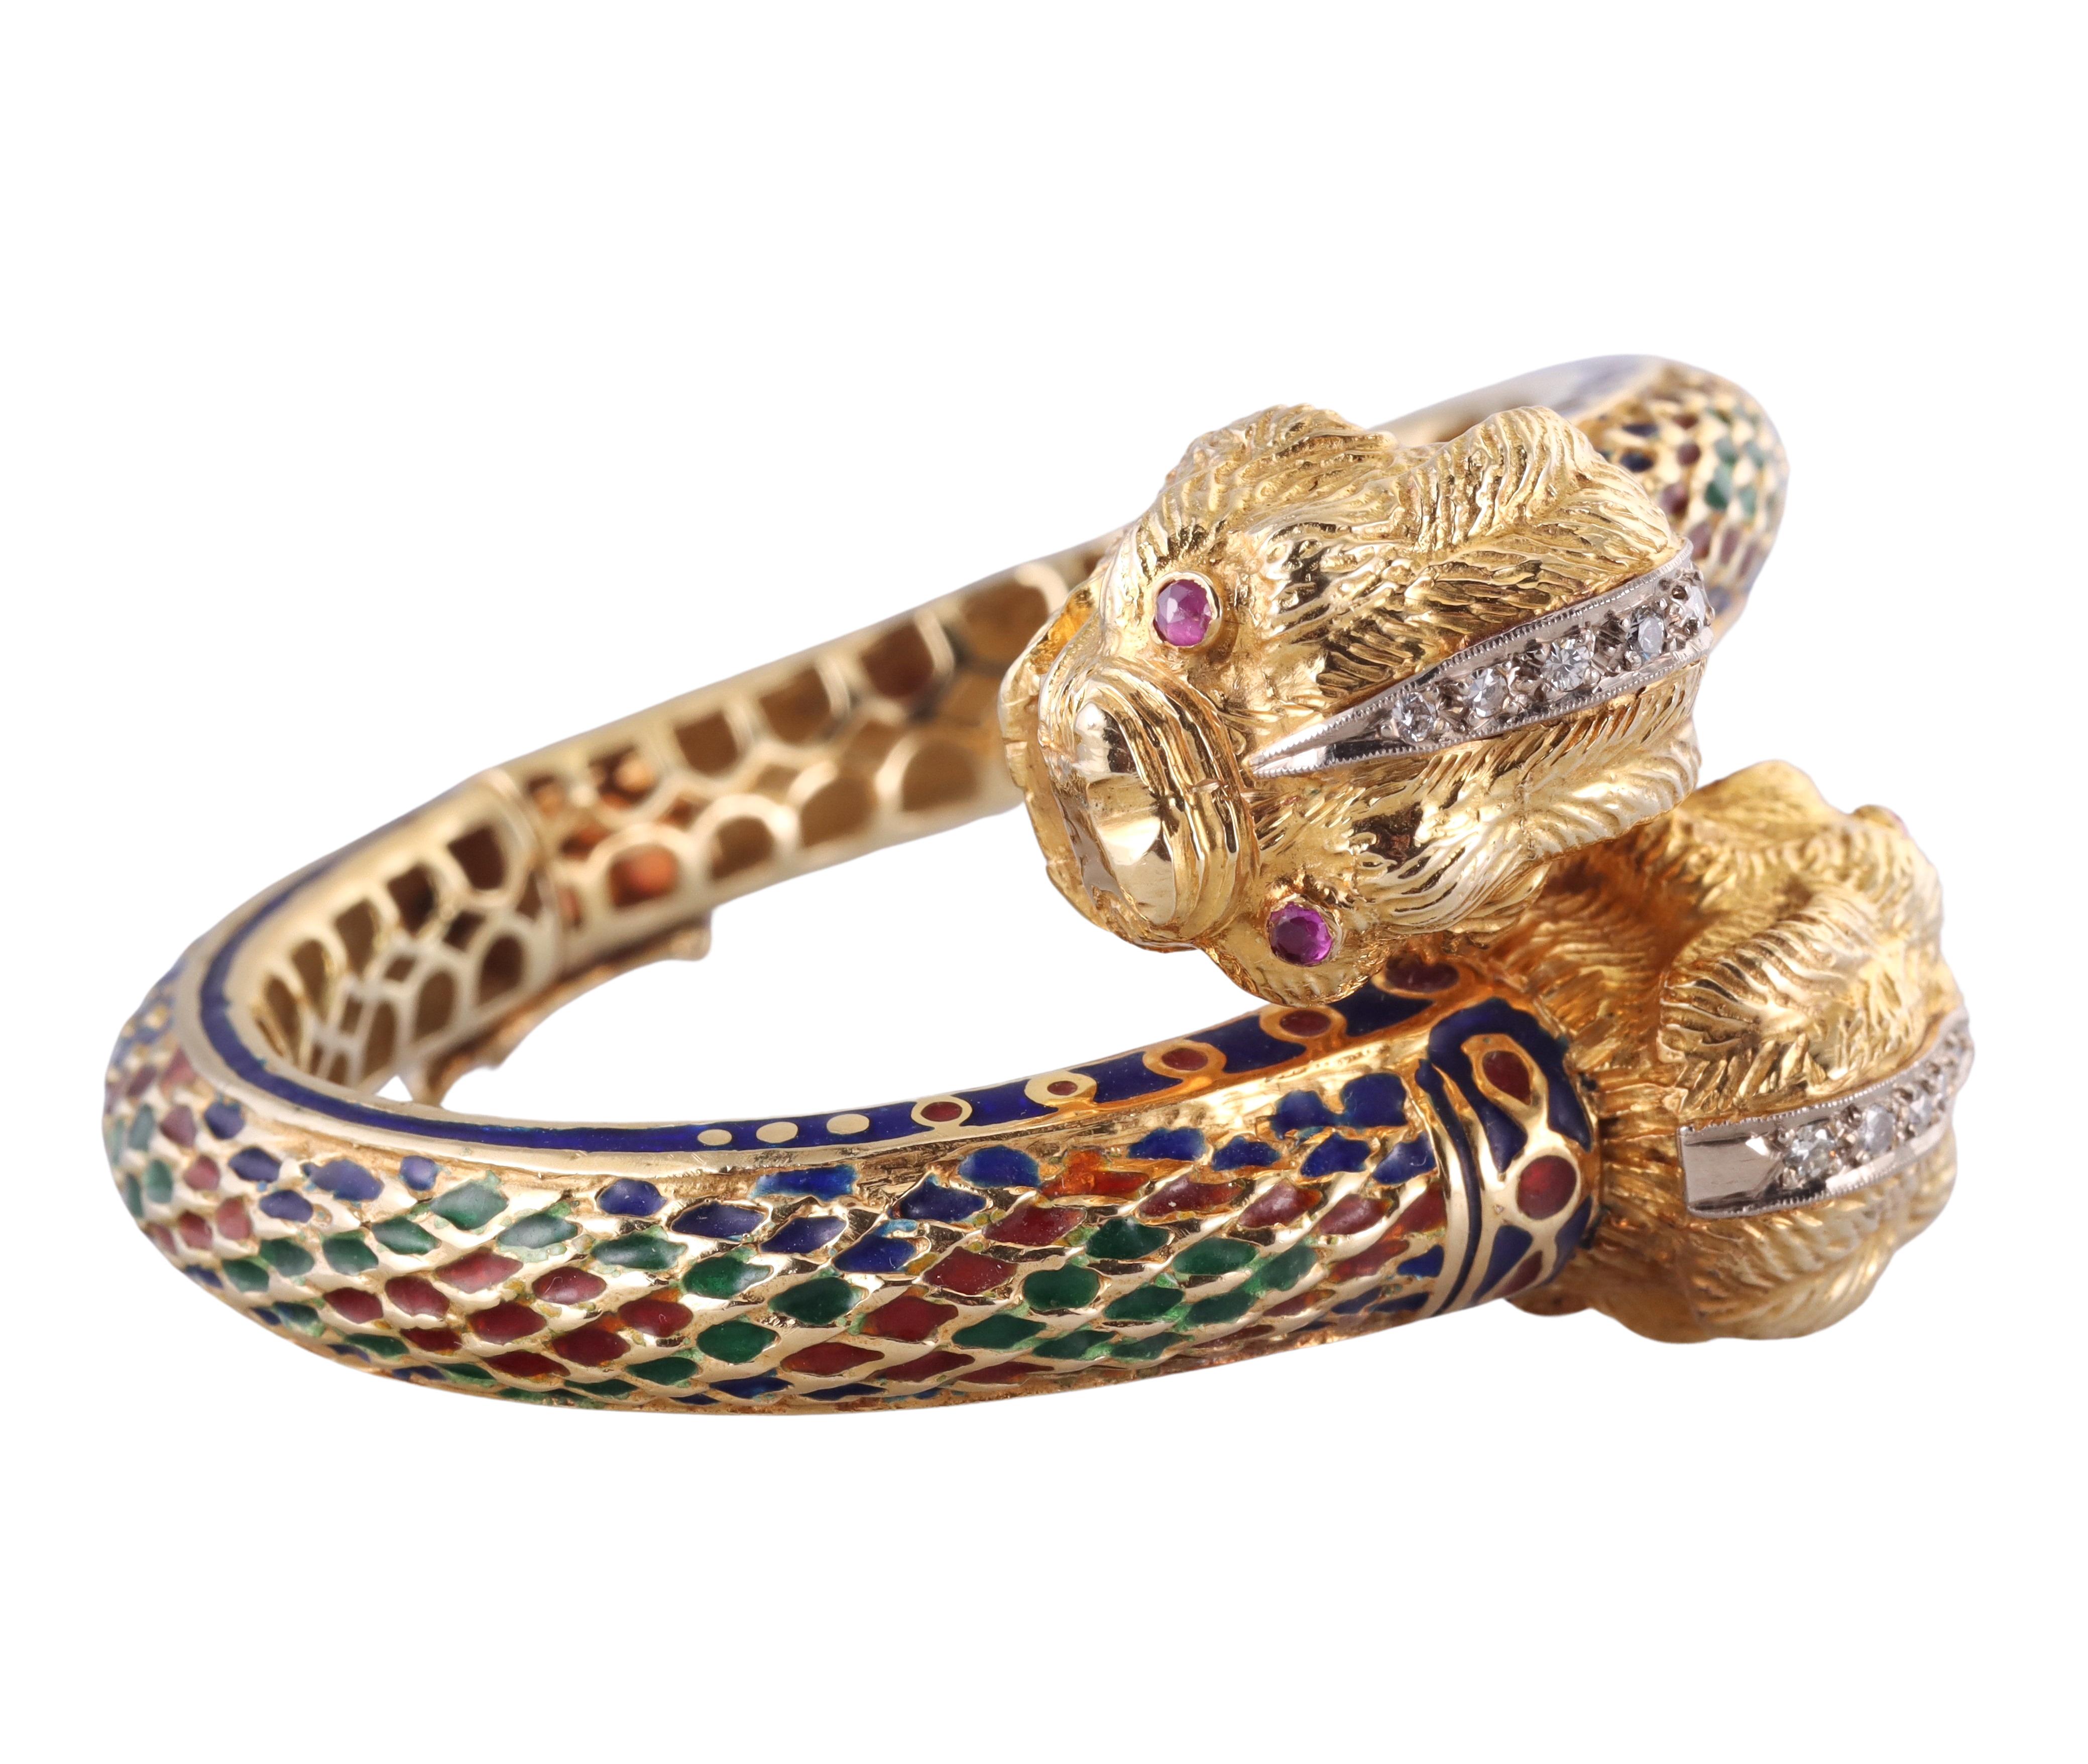 An 18k gold Greek made Chimera bracelet, adorned with enamel, ruby eyes and approximately 0.12ctw H/VS diamonds. Bracelet will fit approximately 6.5